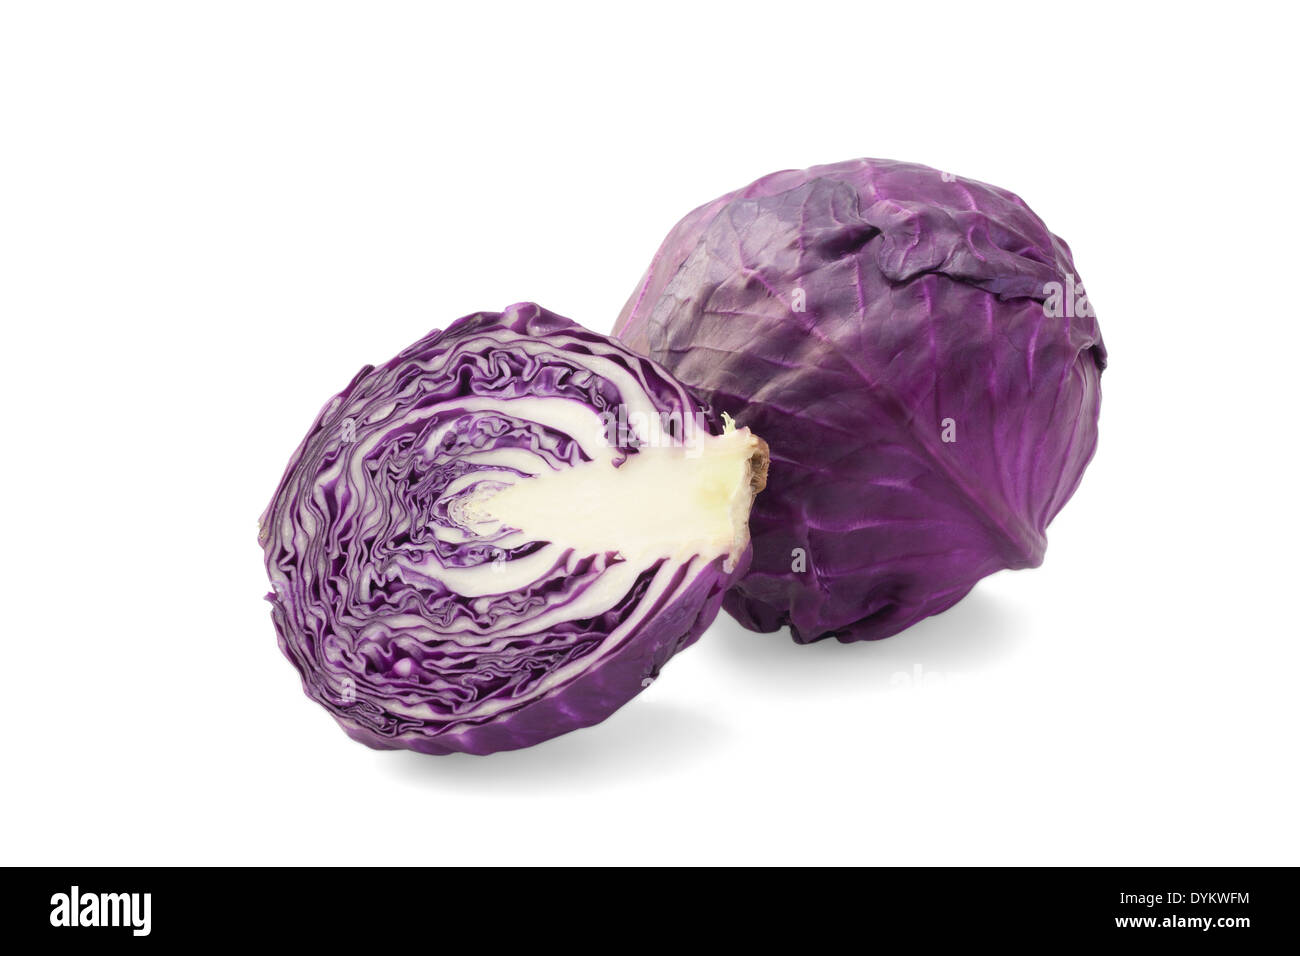 Red cabbage or violet cabbage Stock Photo